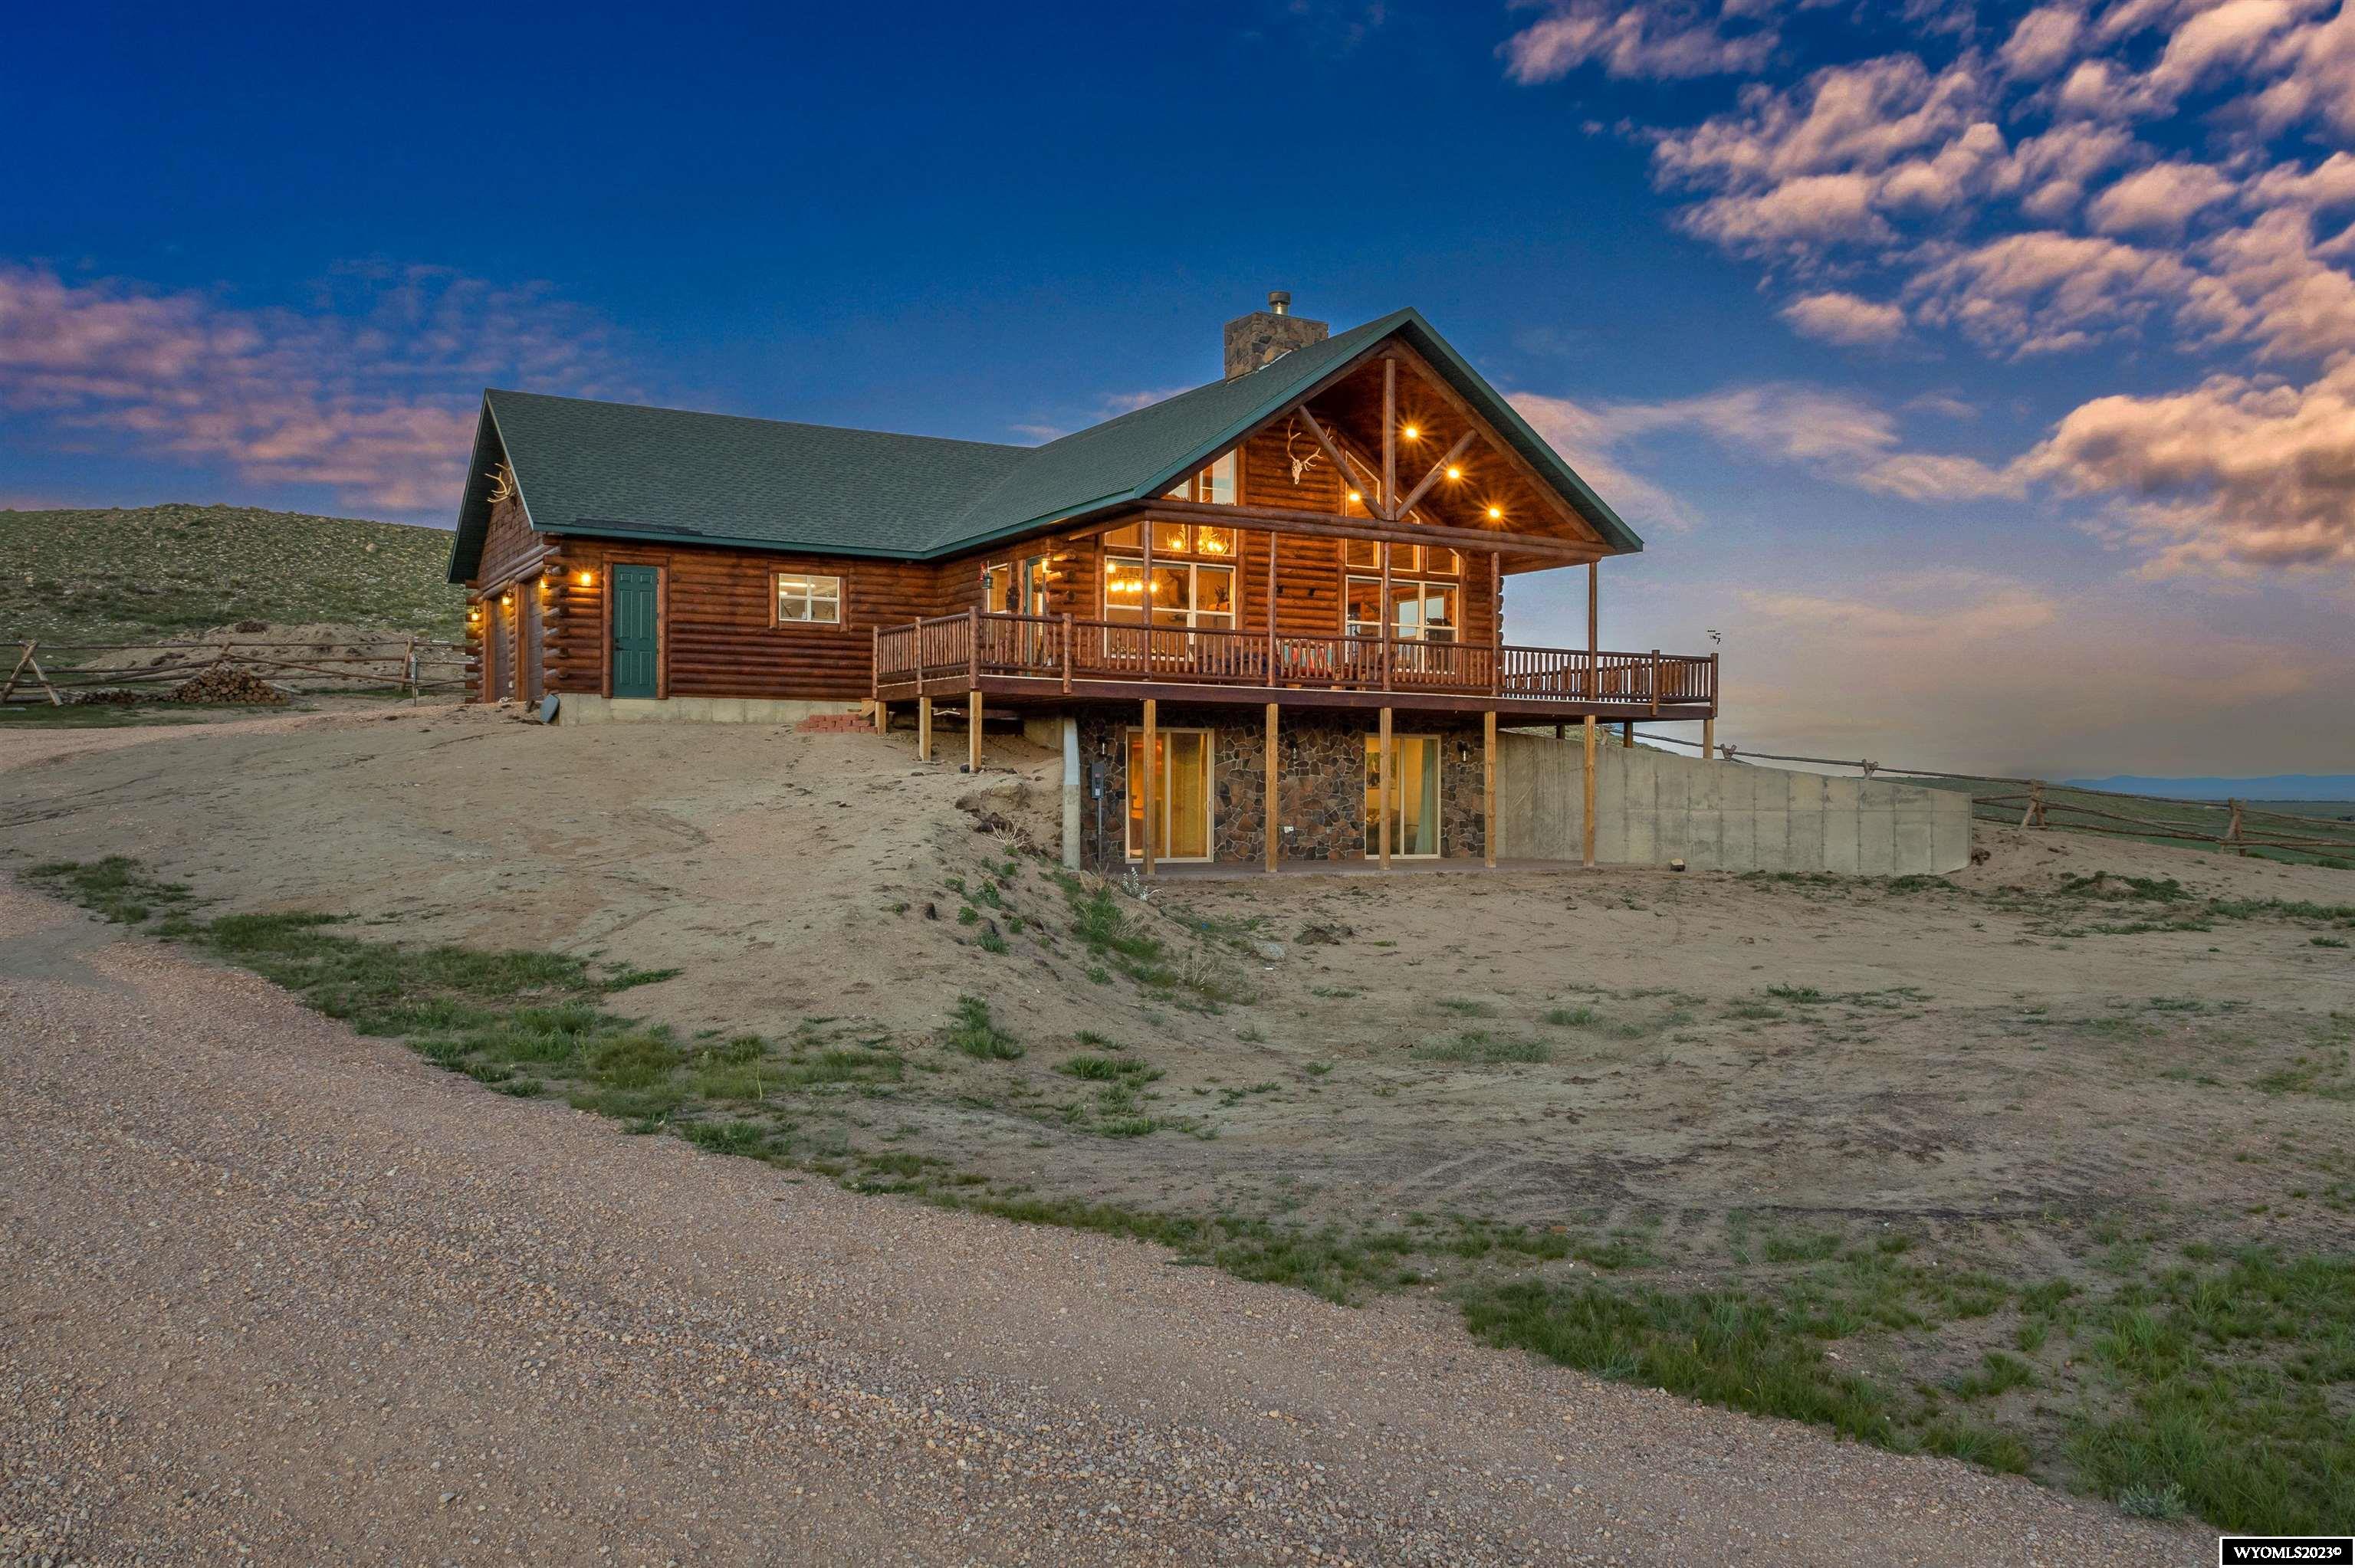 Breathtaking new log home in Wild Horse Ranch with beautiful mountain views! Built in 2021, this 2900 +/- sq ft home boasts direct views of the Medicine Bow National Forest and Lake Hattie just minutes from Laramie. Bordering 240 +/- acres of National Forest to the north and west, you'll have plenty of room to roam and no close-by neighbors! The beautiful custom home features a spacious master bedroom suite on the main floor while the walk-out basement holds an additional 3 bedrooms and large lounge area. Top of the line Kitchen-Aid kitchen appliances and an on-demand reverse-osmosis system with beautiful kitchen cabinetry and countertops compliment a cozy rustic design scheme .The main level open floor plan lends to spacious entertainment opportunities around a huge stone fireplace with tremendous western views through. Utilize the wrap-around deck on cozy evenings watching the sun set over the mountains just across the valley. Located in the northwest corner of the property is the last-remaining original settlers cabin in the area, which has been utilized for picnics, relaxing, and even as a hunting blind. The area holds deer, antelope, and the occasional elk, with nearby public hunting opportunities in Wyoming Game Units 9 (elk resident general), 76 (deer resident general), and 45 (antelope draw).Additional conveniences include a pet wash, pet door/turnout area, 50 amp RV connections, landscaping, patio and more.  Tons more to learn about this magnificent opportunity to step into a beautiful new build in the peace and quiet of Wild Horse Ranch. Contact Land Specialist Drue Meyer to learn more and set up a private showing!